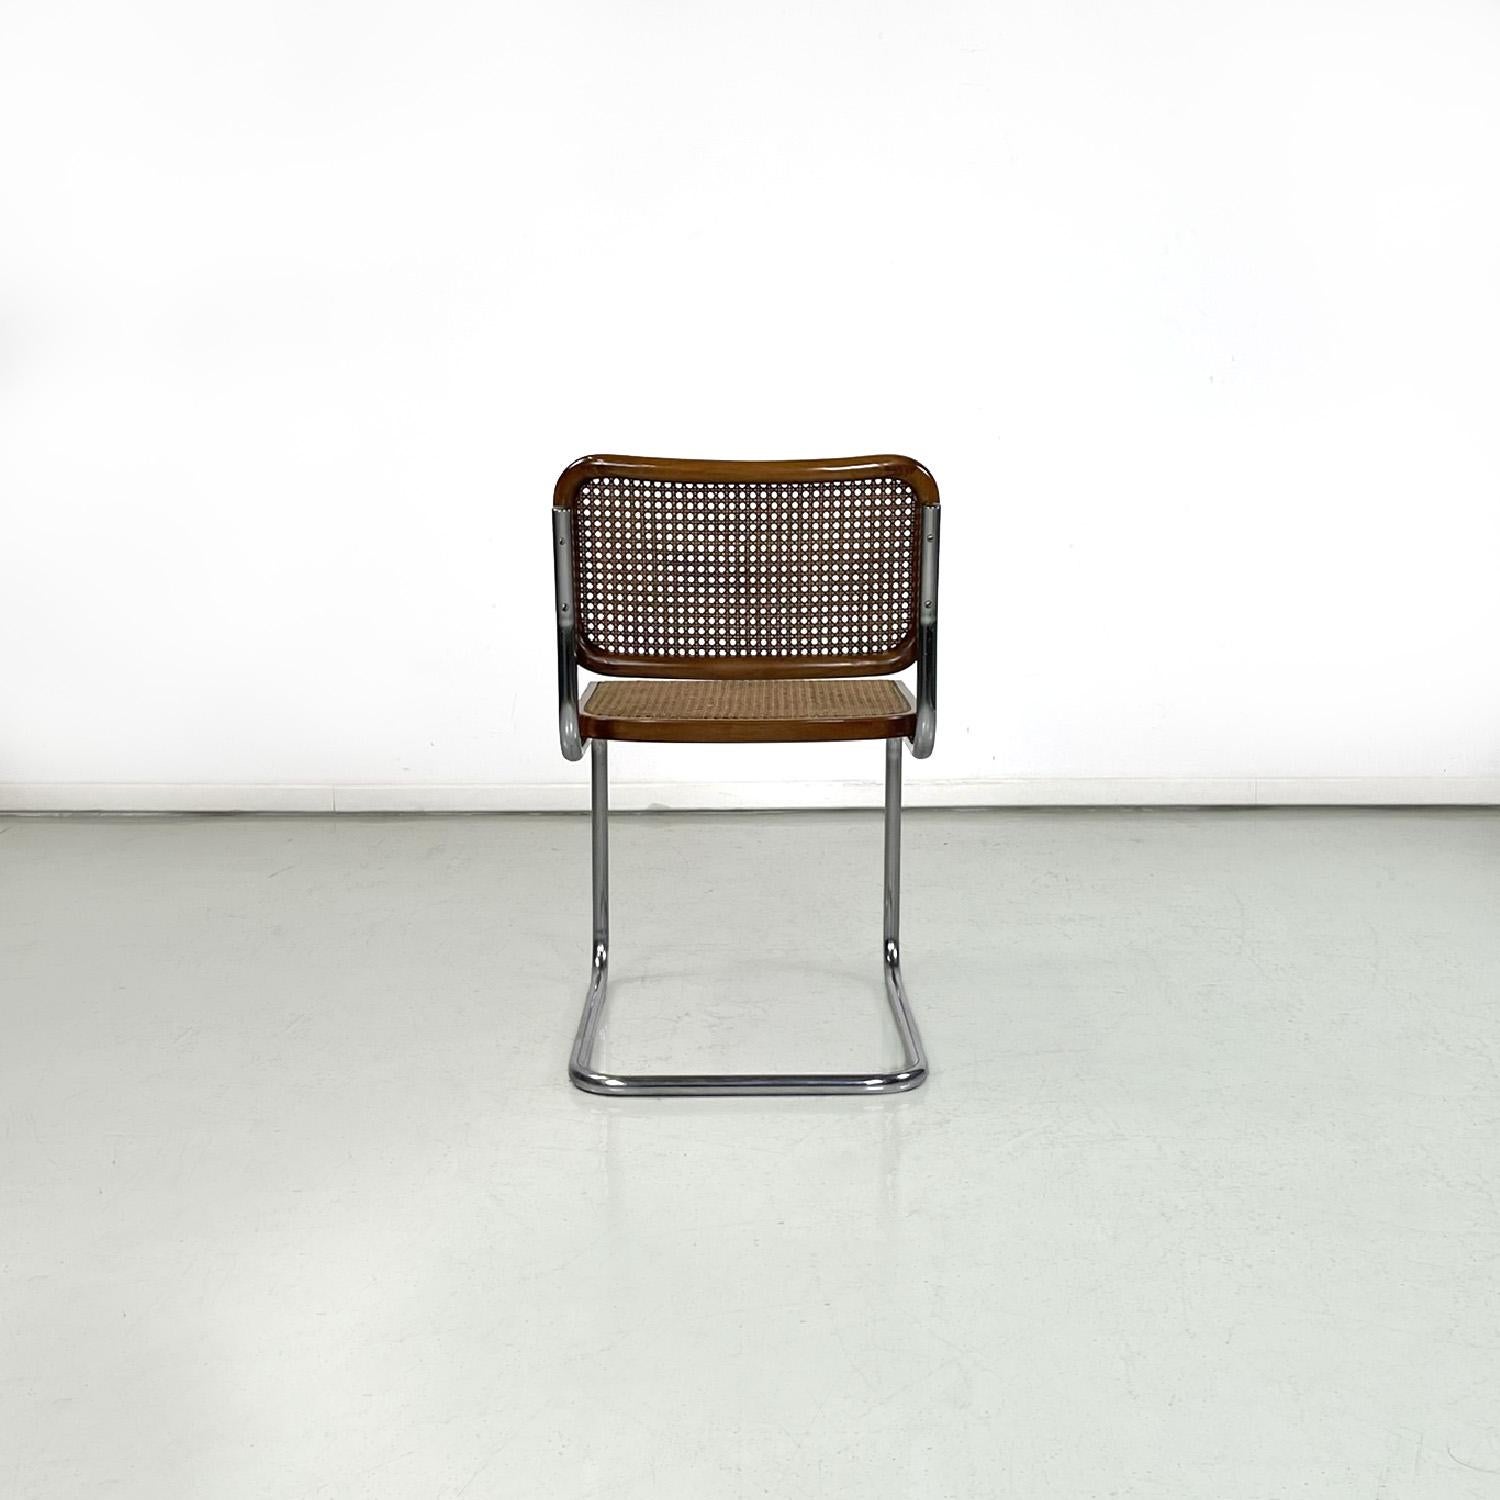 Mid-20th Century Italian mid-century modern chairs in wood straw and steel, 1960s